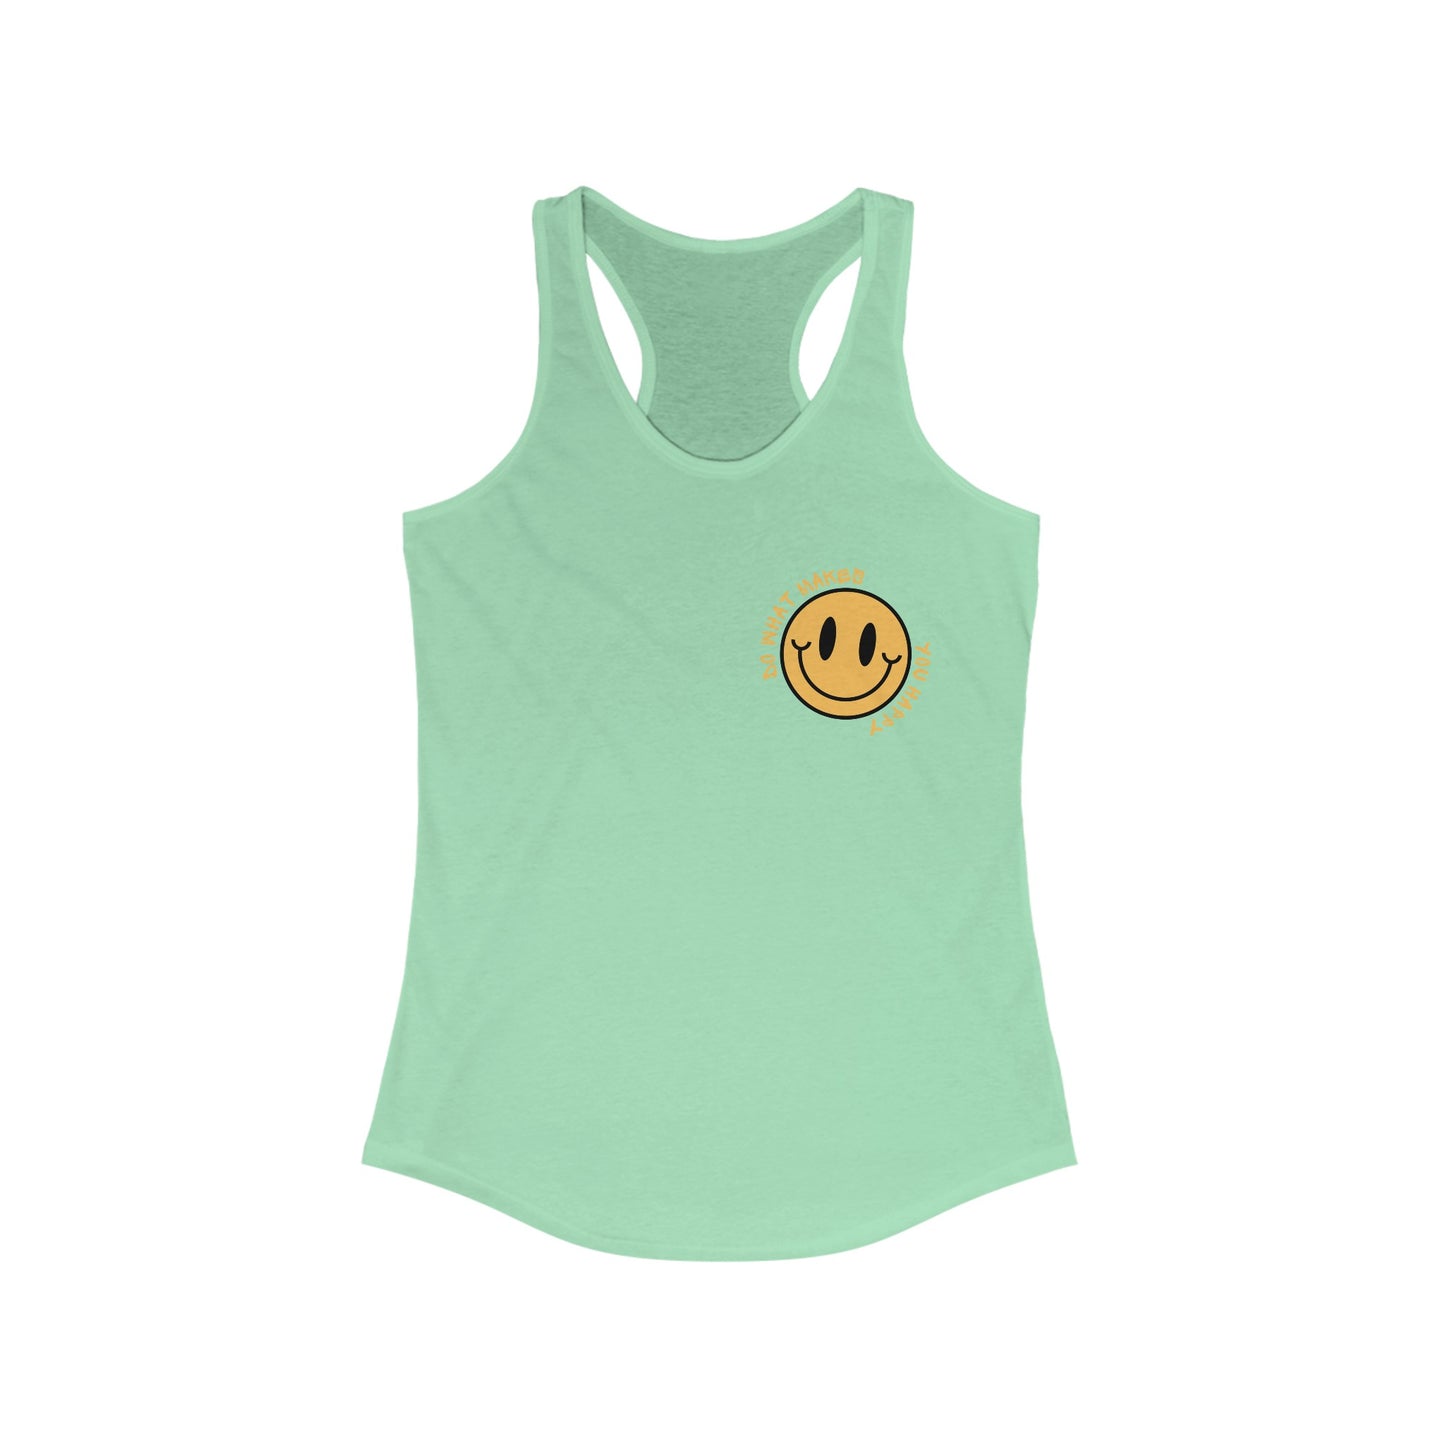 DO WHAT MAKES YOU HAPPY Women's Ideal Racerback Tank